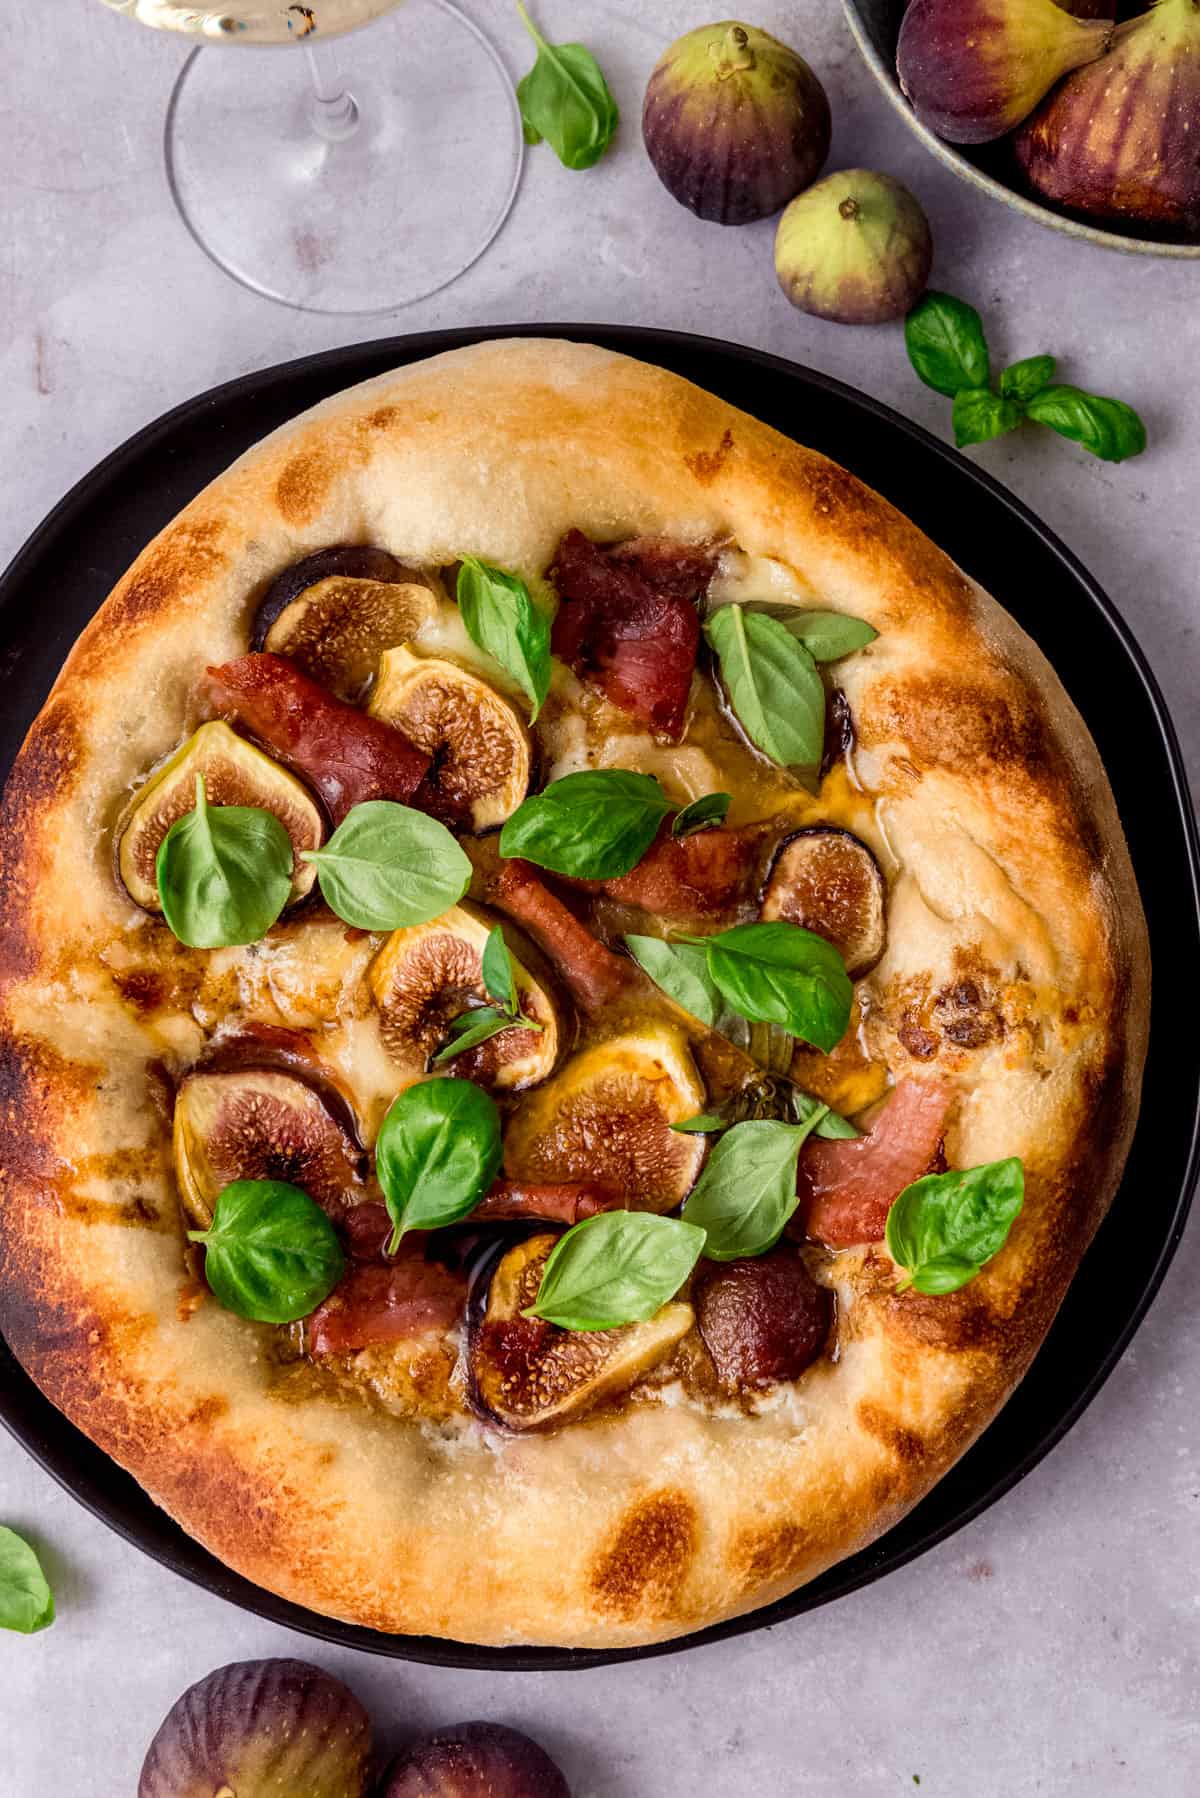 Prosciutto and fig pizza topped with a drizzle of balsamic and fresh basil leaves.